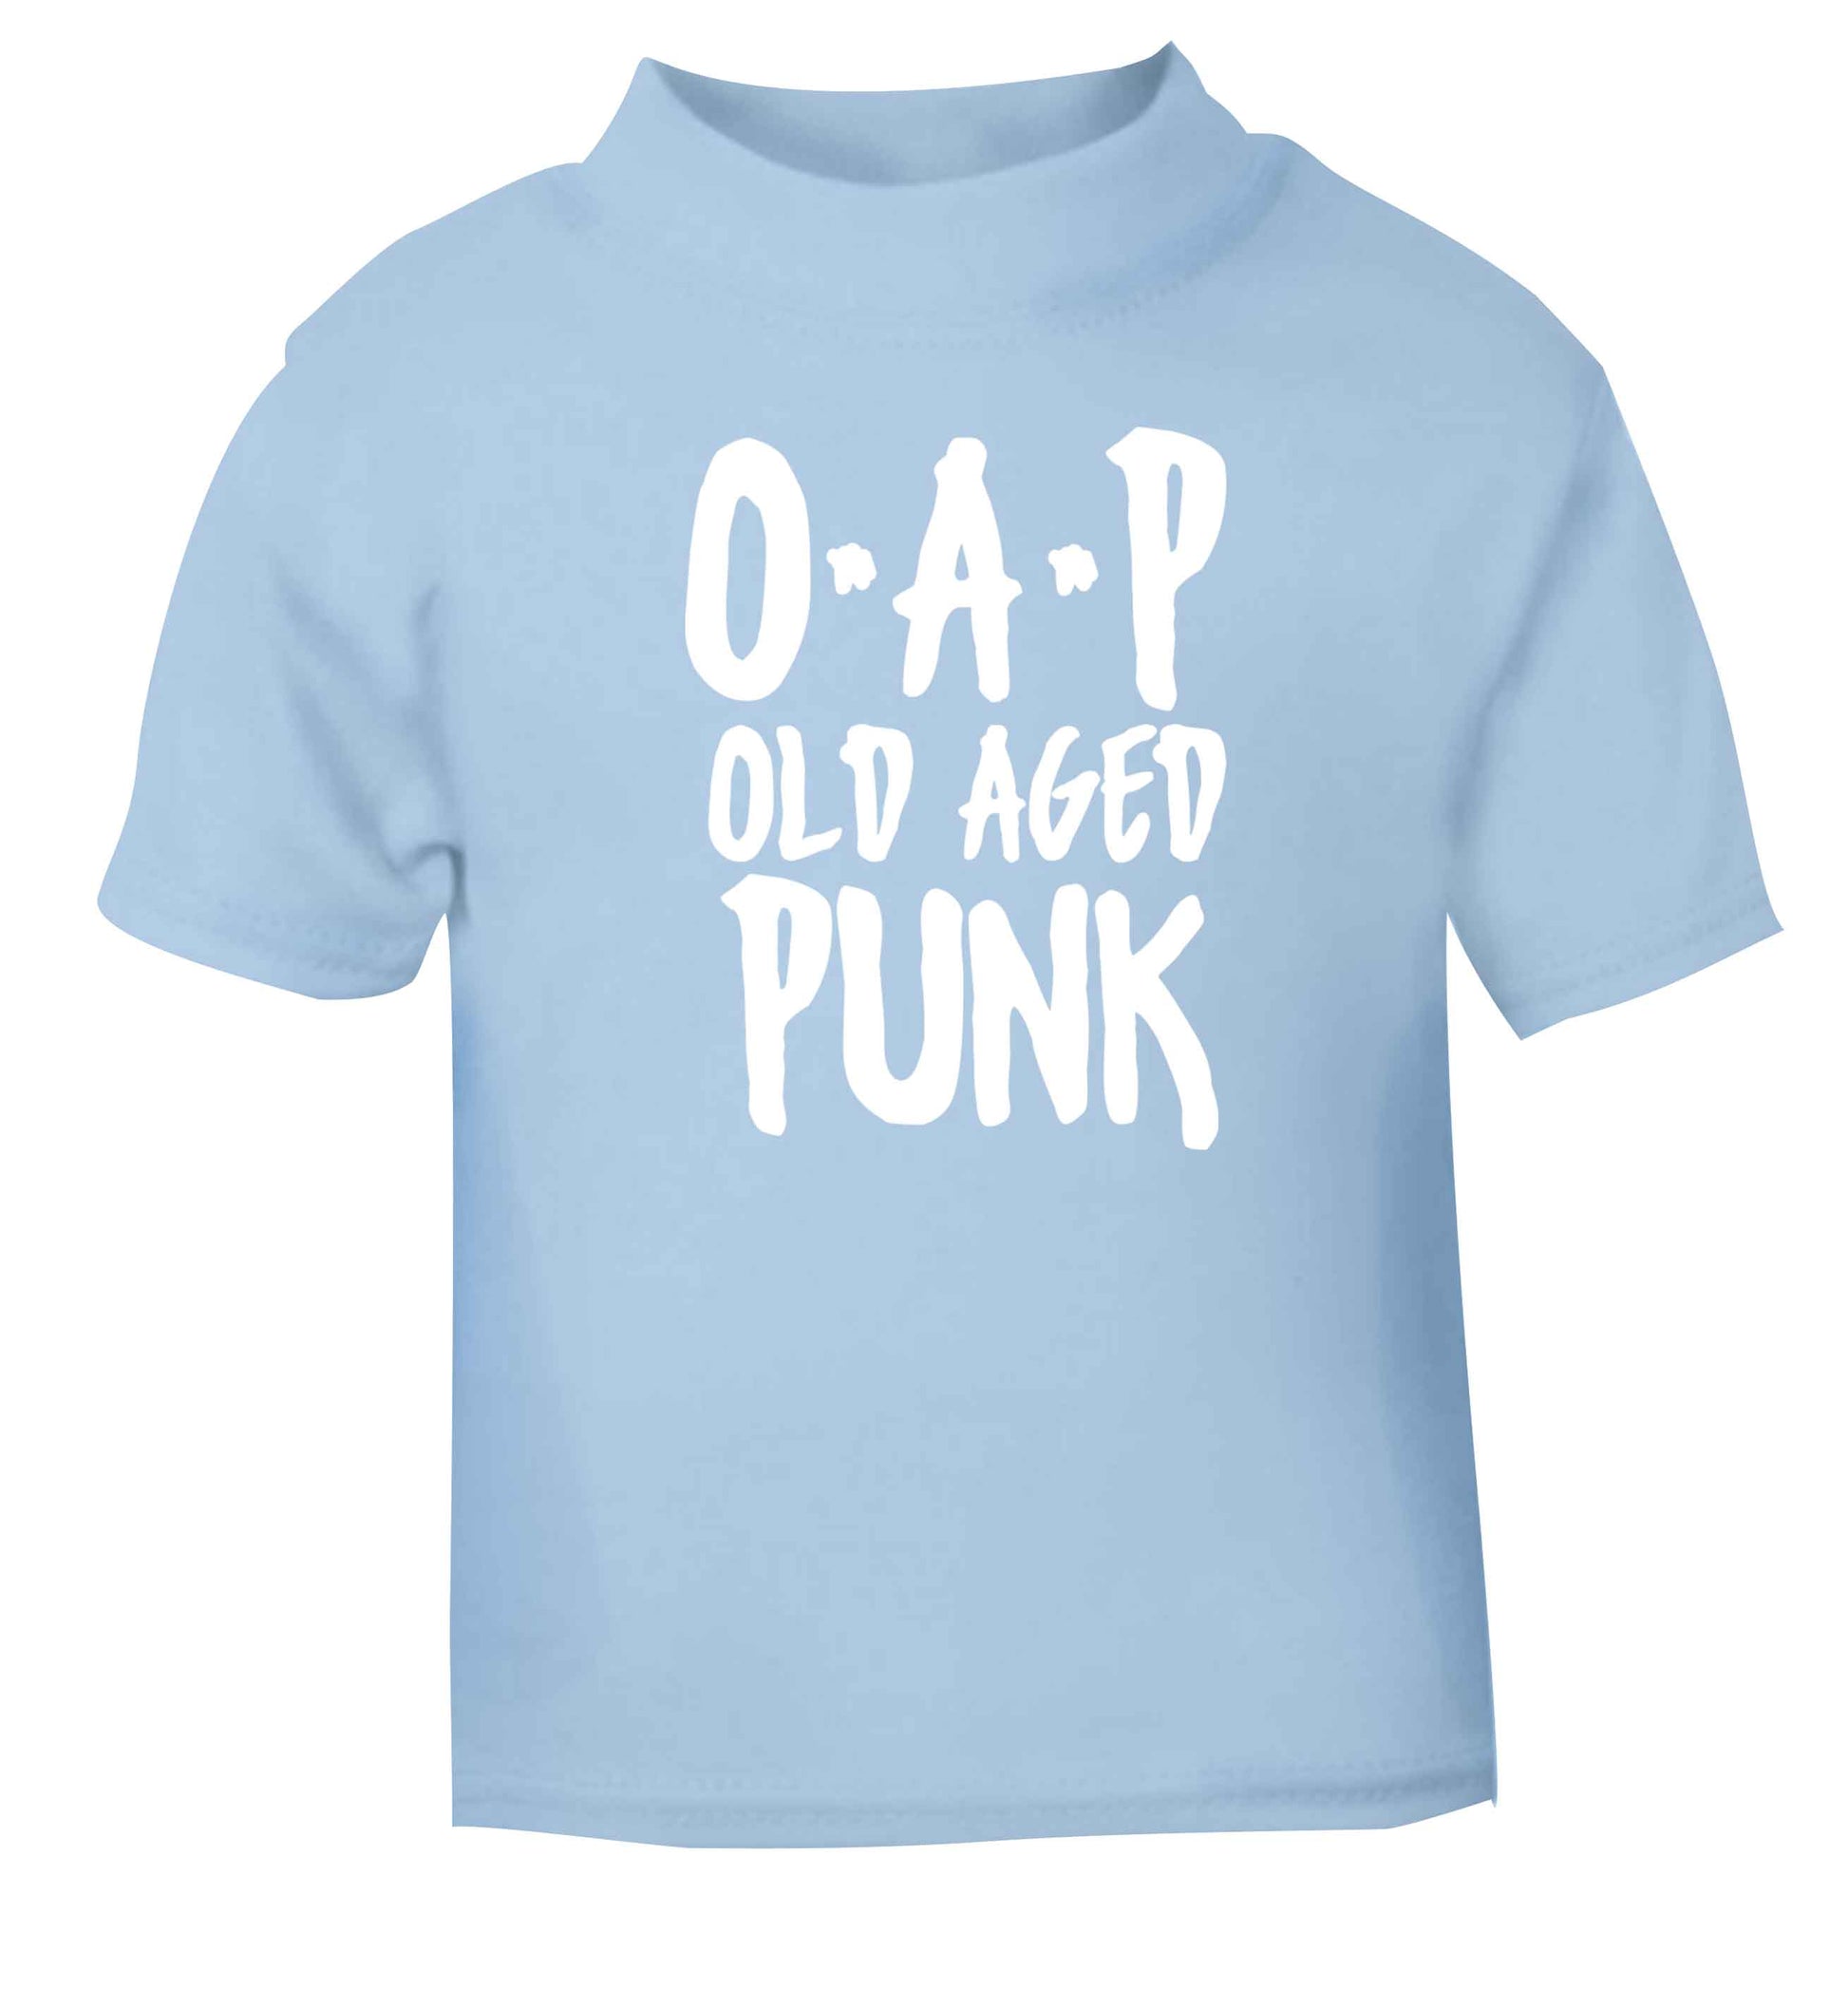 O.A.P Old Age Punk light blue Baby Toddler Tshirt 2 Years